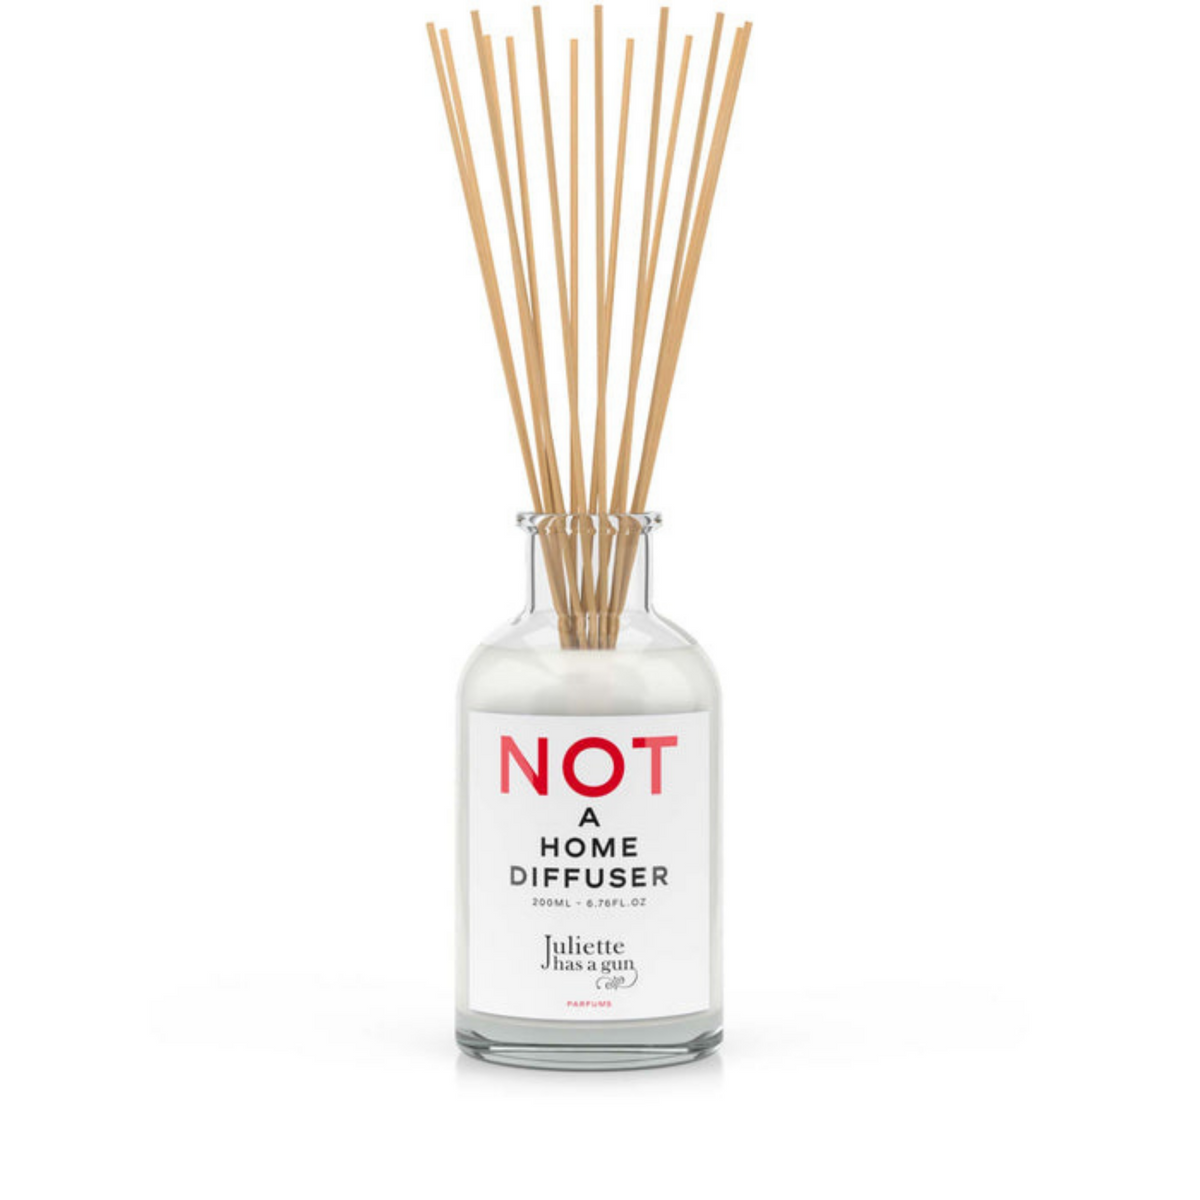 Primary Image of Not A Home Diffuser